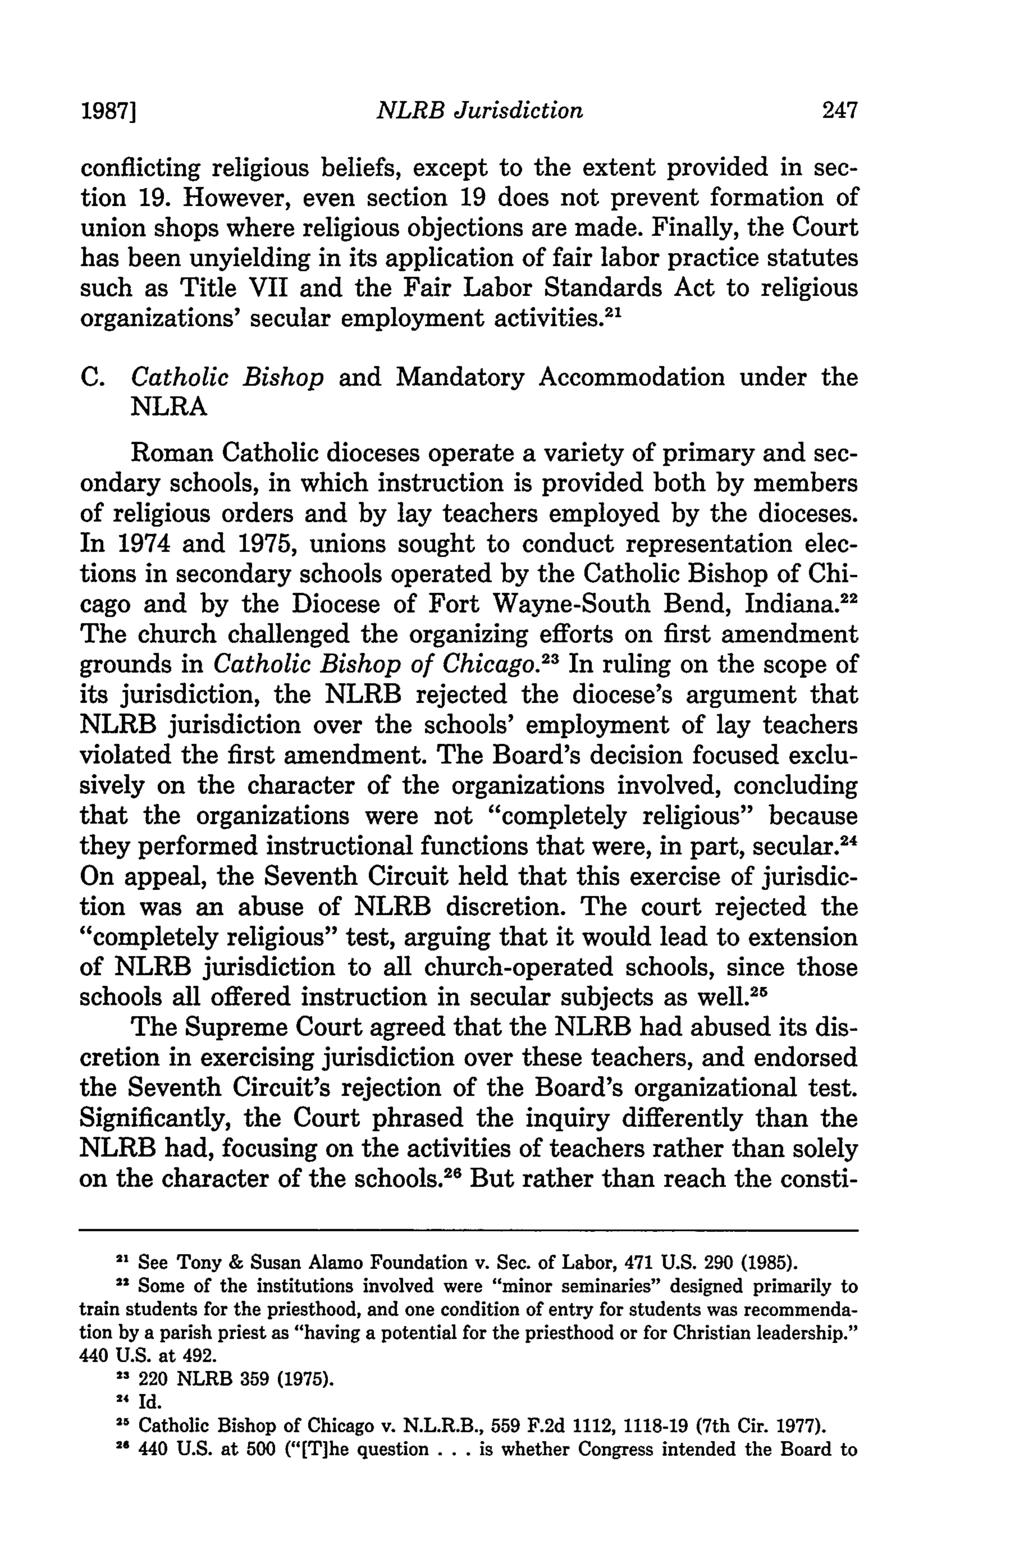 1987] NLRB Jurisdiction conflicting religious beliefs, except to the extent provided in section 19.